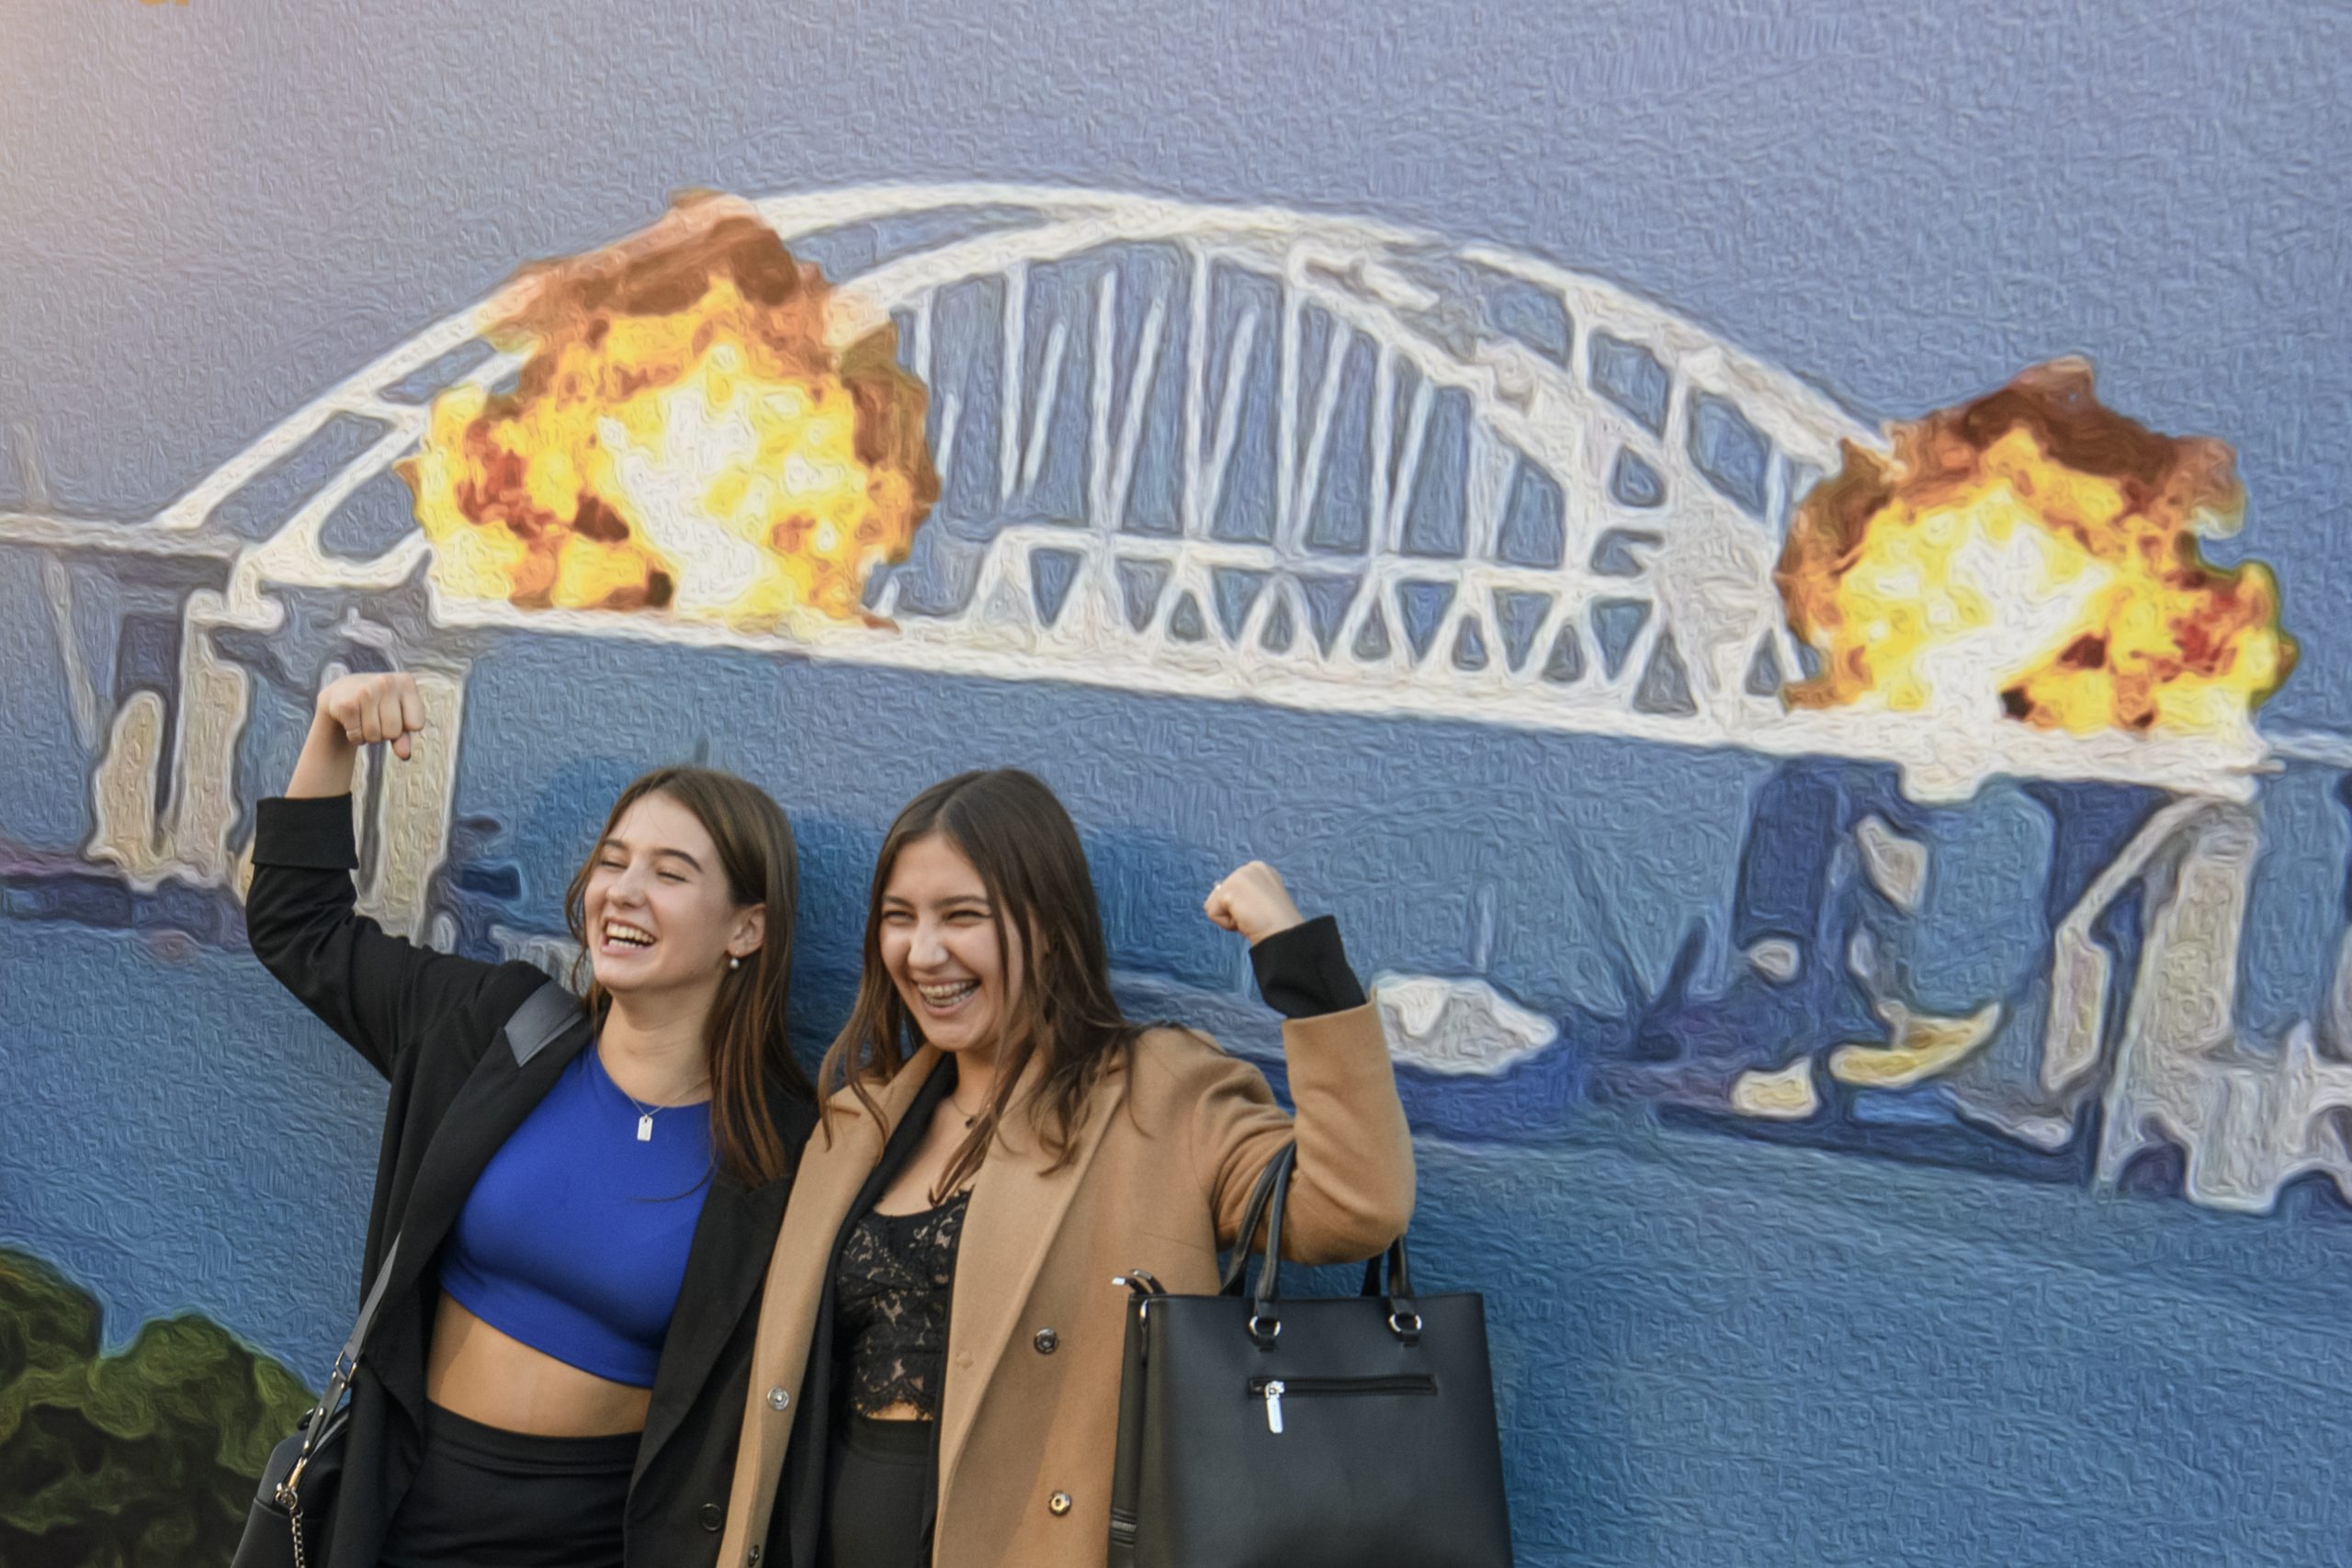 Photo: People pose for photos and take selfies in front of the large poster form of postage stamp depicting the Crimean Kerch Bridge on fire in Kyiv, Ukraine, October 08, 2022. Credit: Maxym Marusenko/NurPhoto